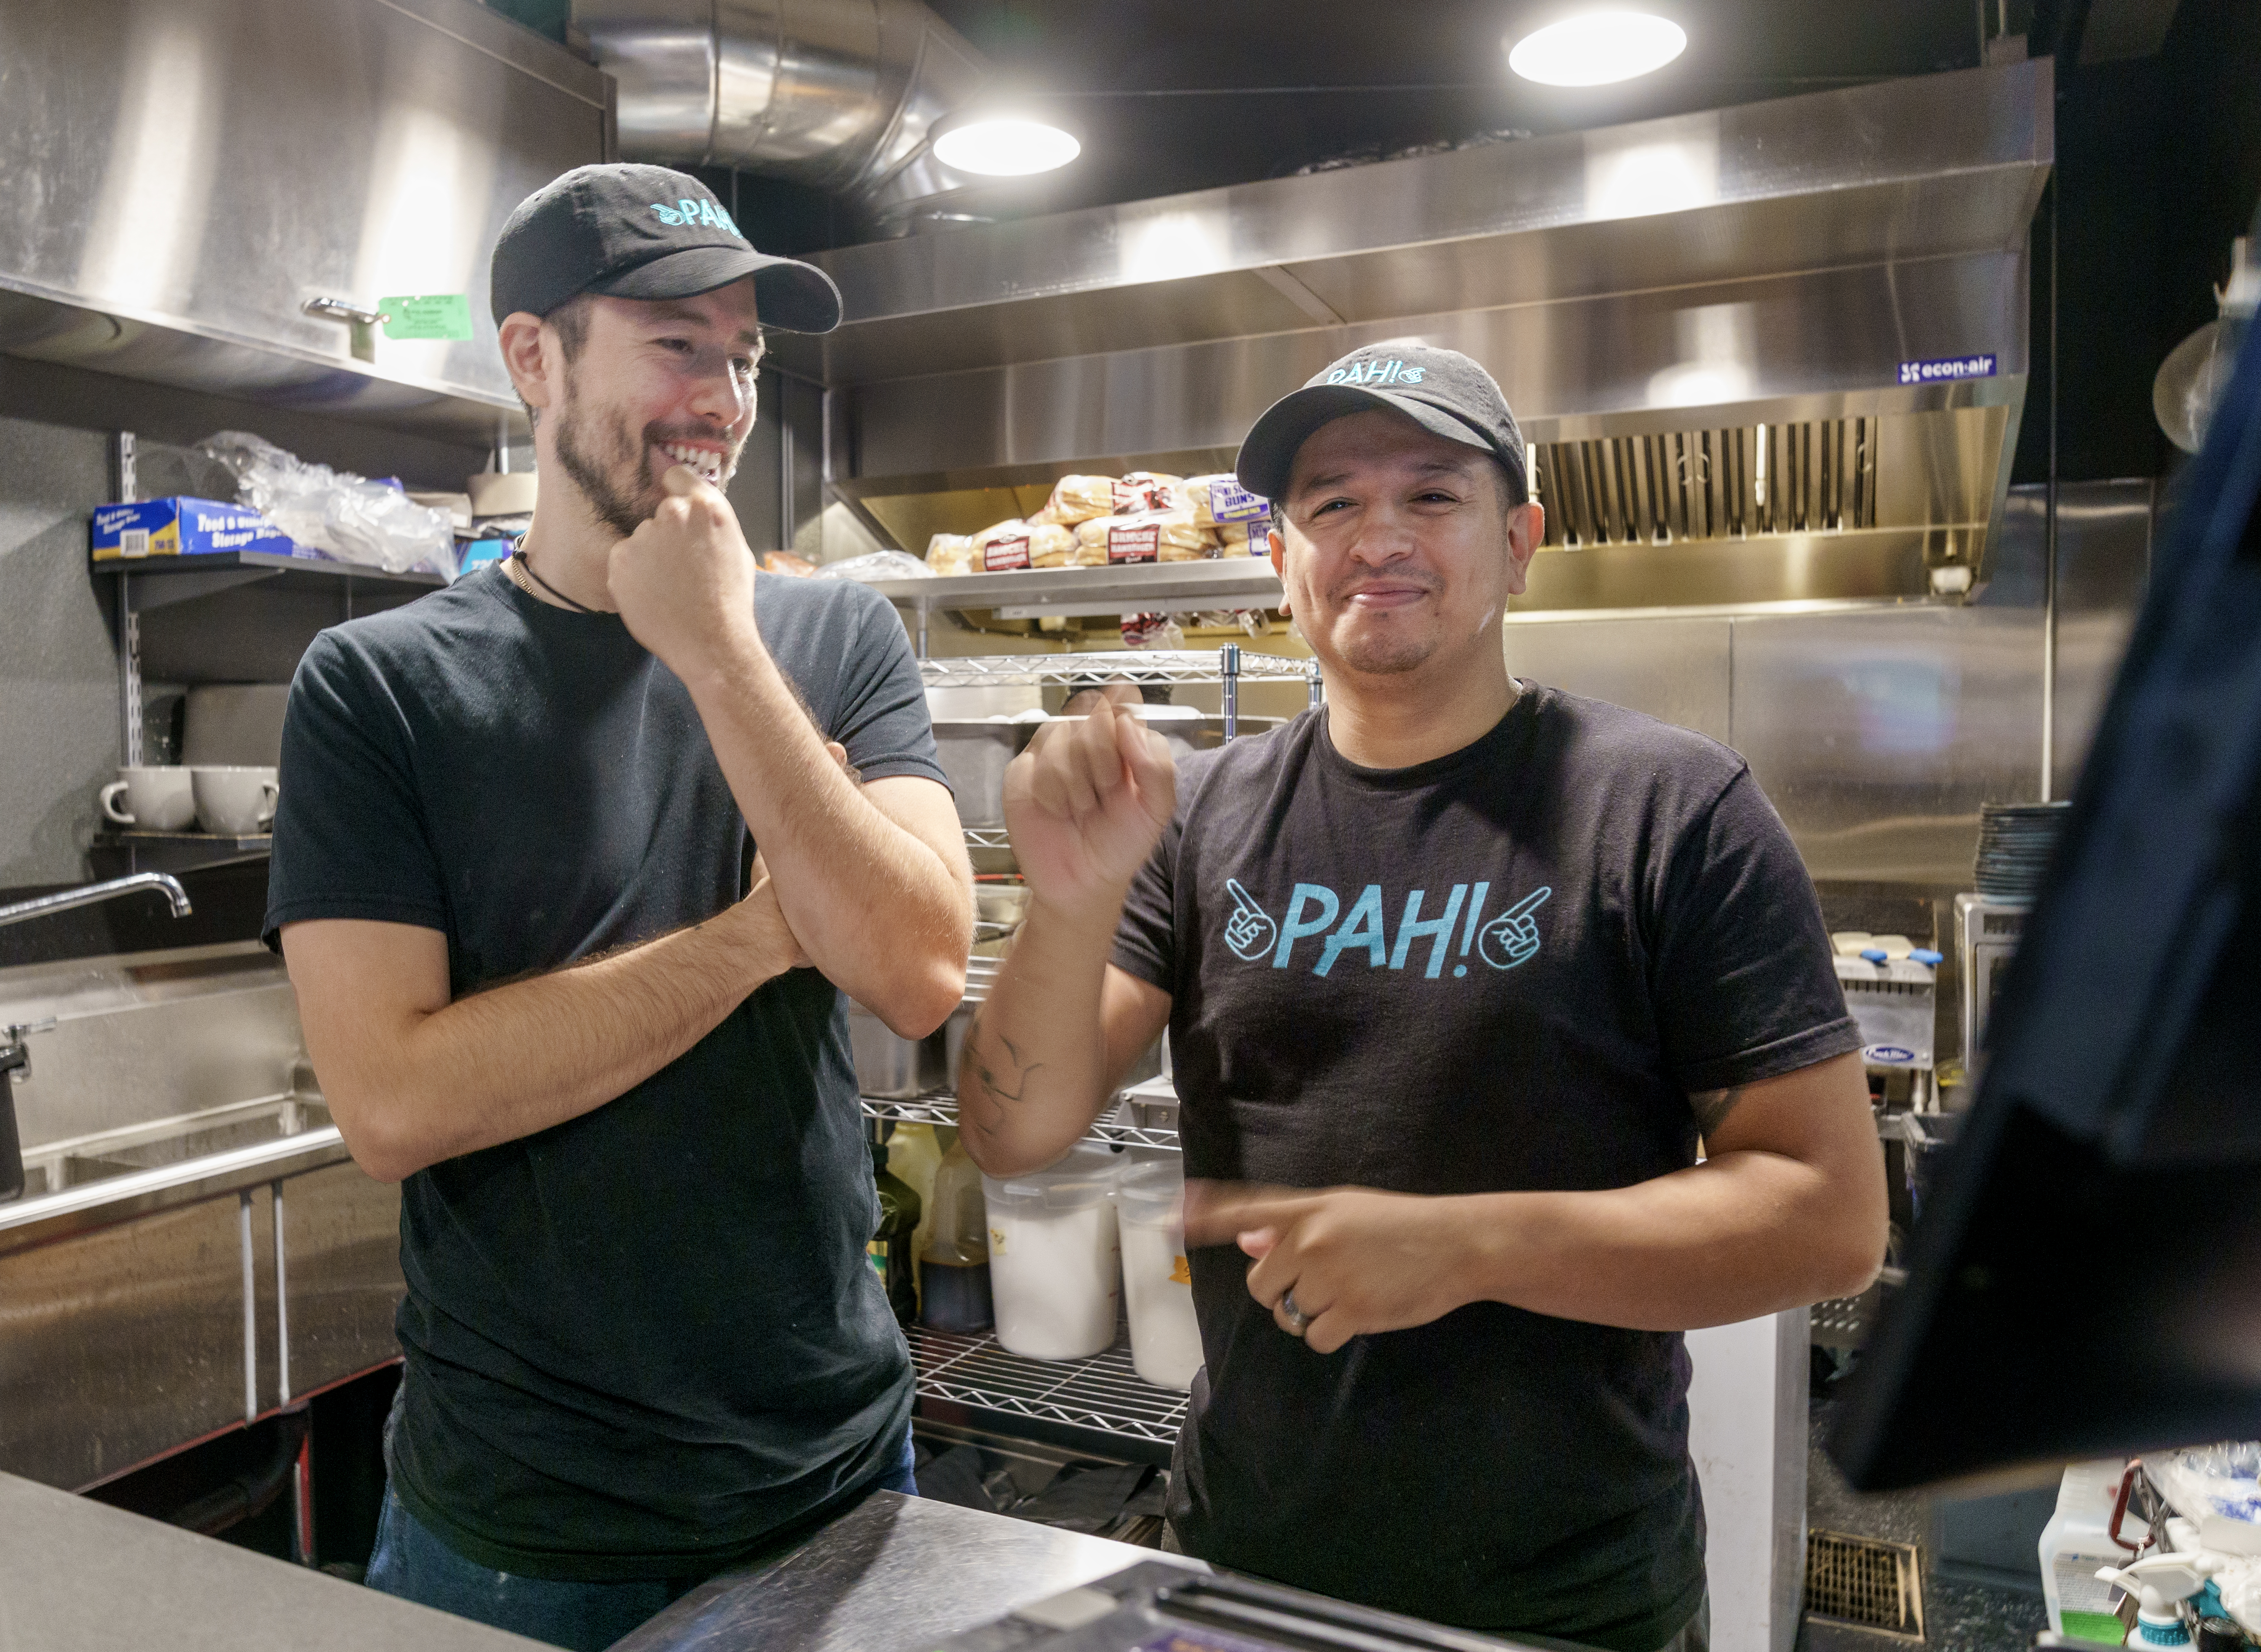 Victor Covarrubias, left, talks with his husband Lillouie Barrios, at their restaurant, Pah!, in Southeast Portland, Sept. 28, 2022. Barrios, who is deaf, had a vision to open a restaurant where he could serve the Deaf community as well as share Deaf culture with hearing people. The business name, Pah!, is American Sign Language slang for “finally” or “success”.